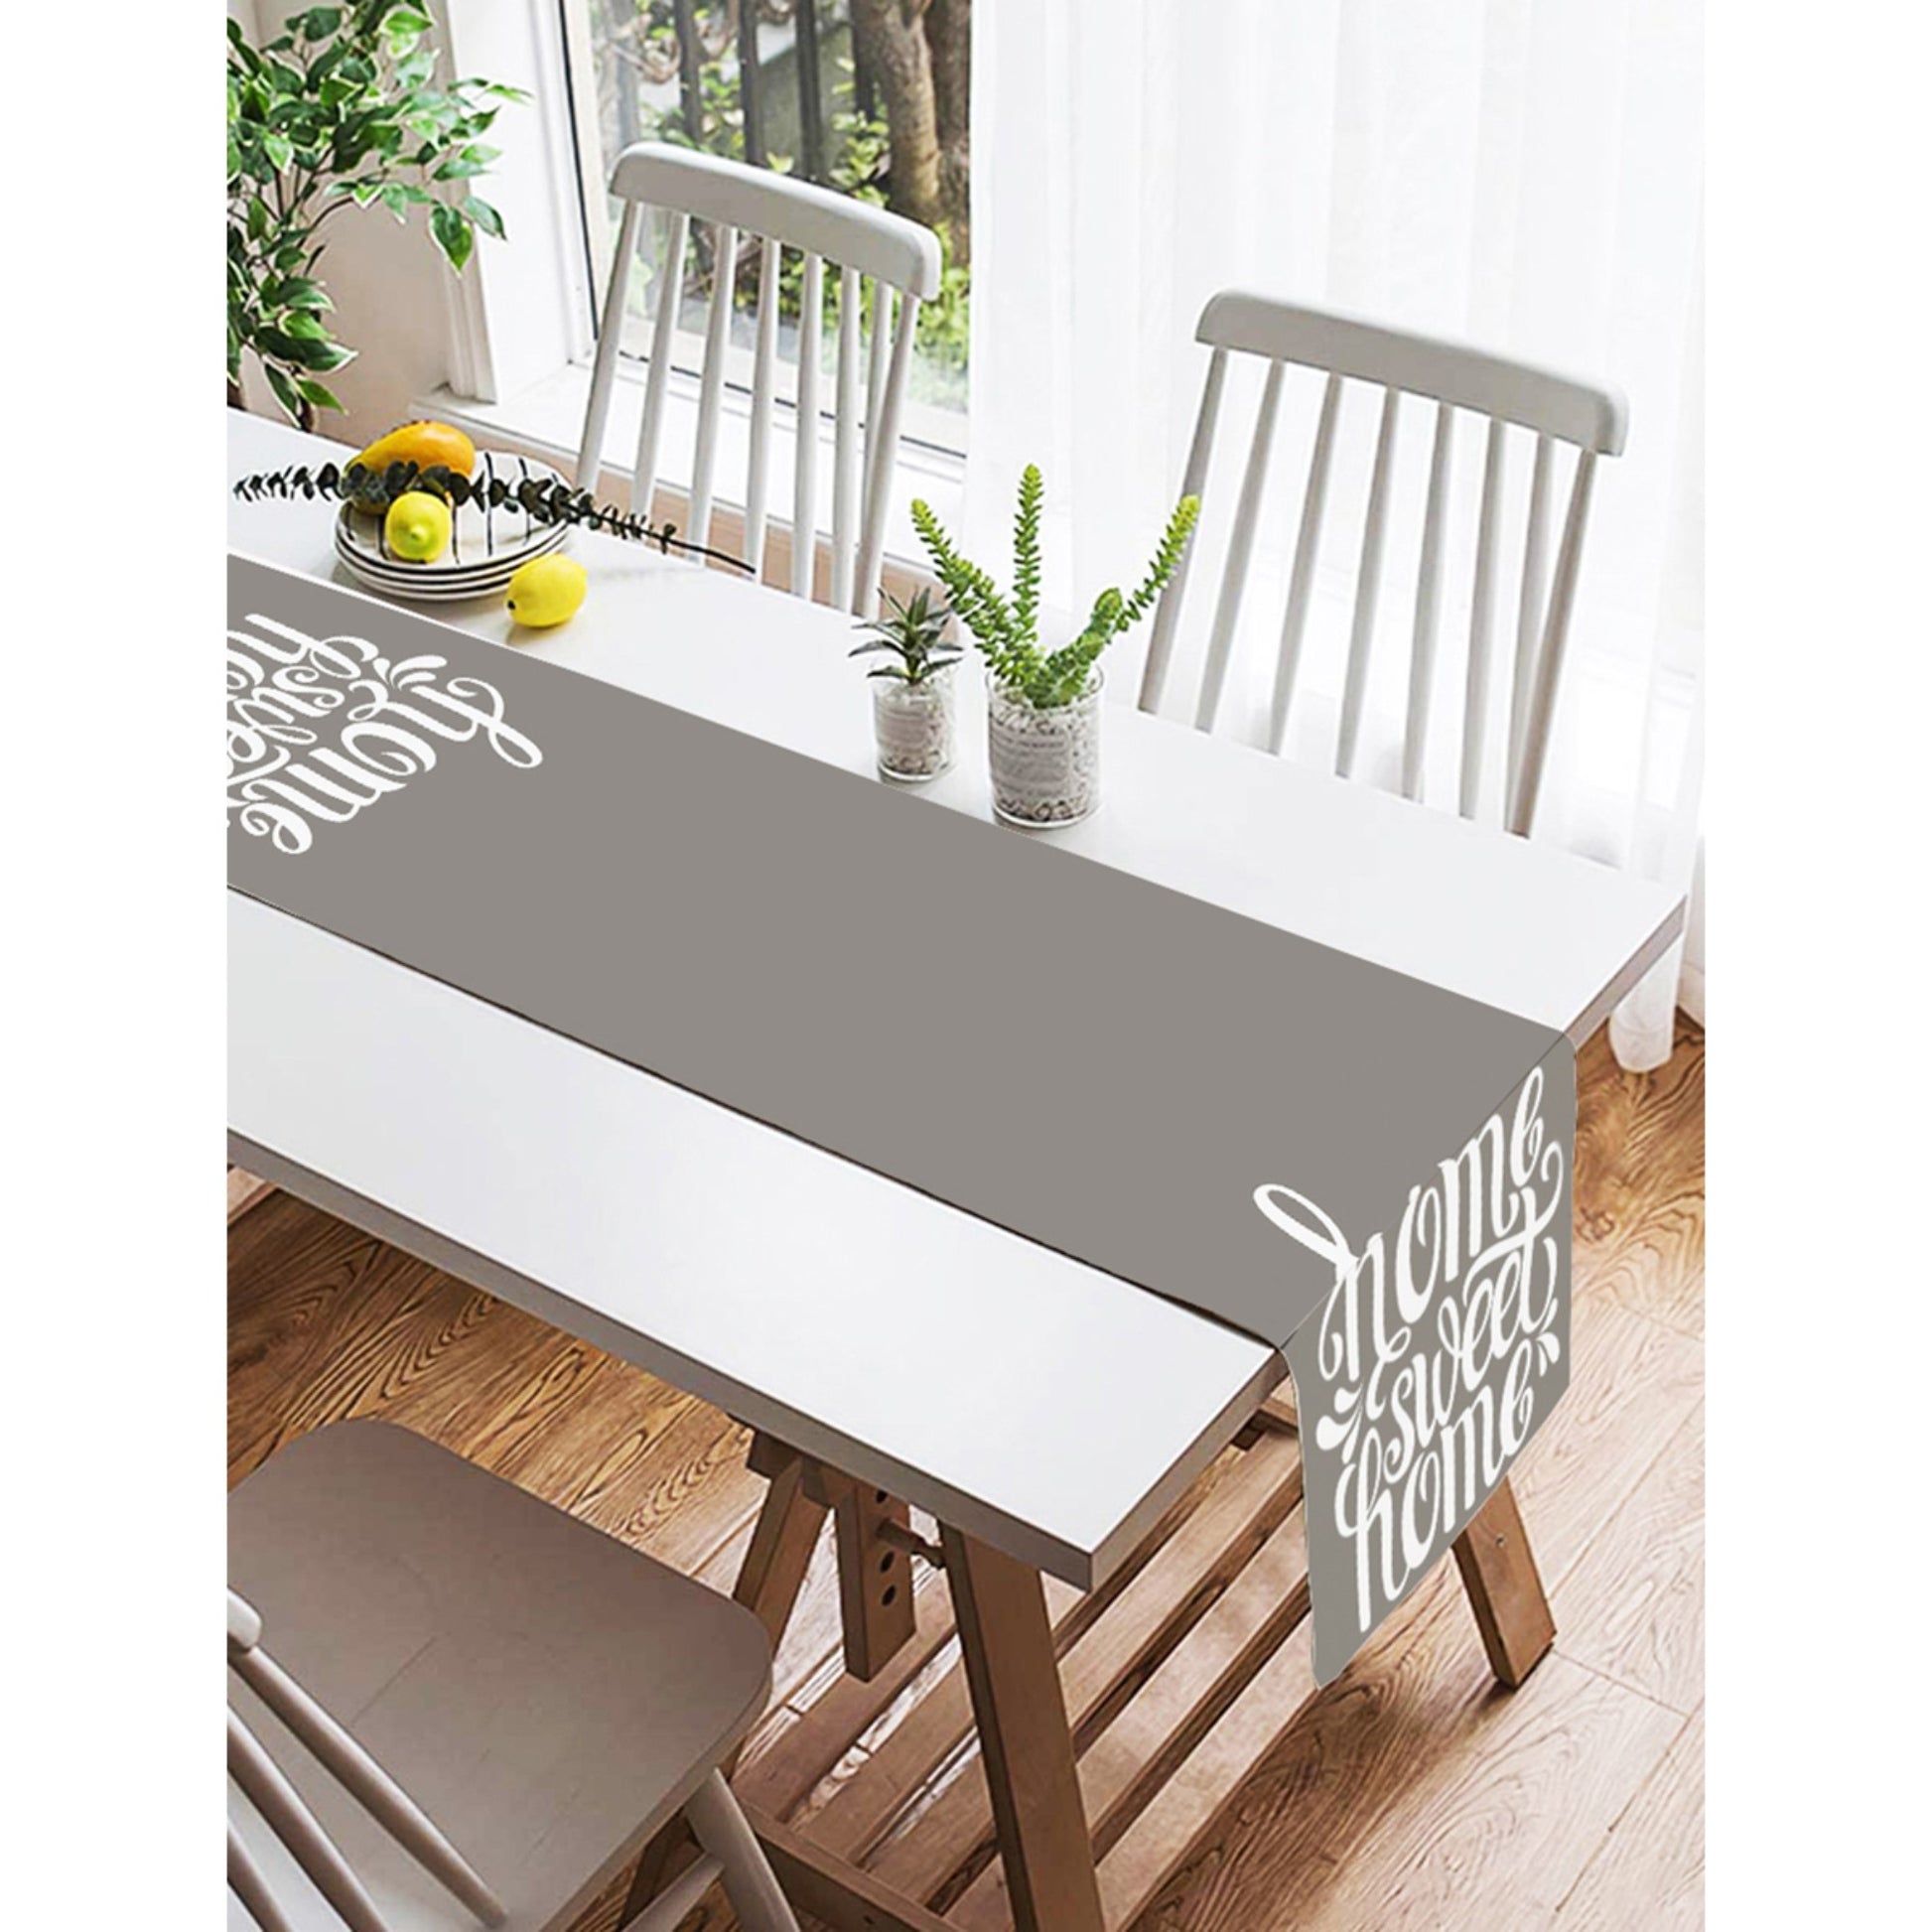 Soft grey table runner featuring "Home Sweet Home" for inviting decor.